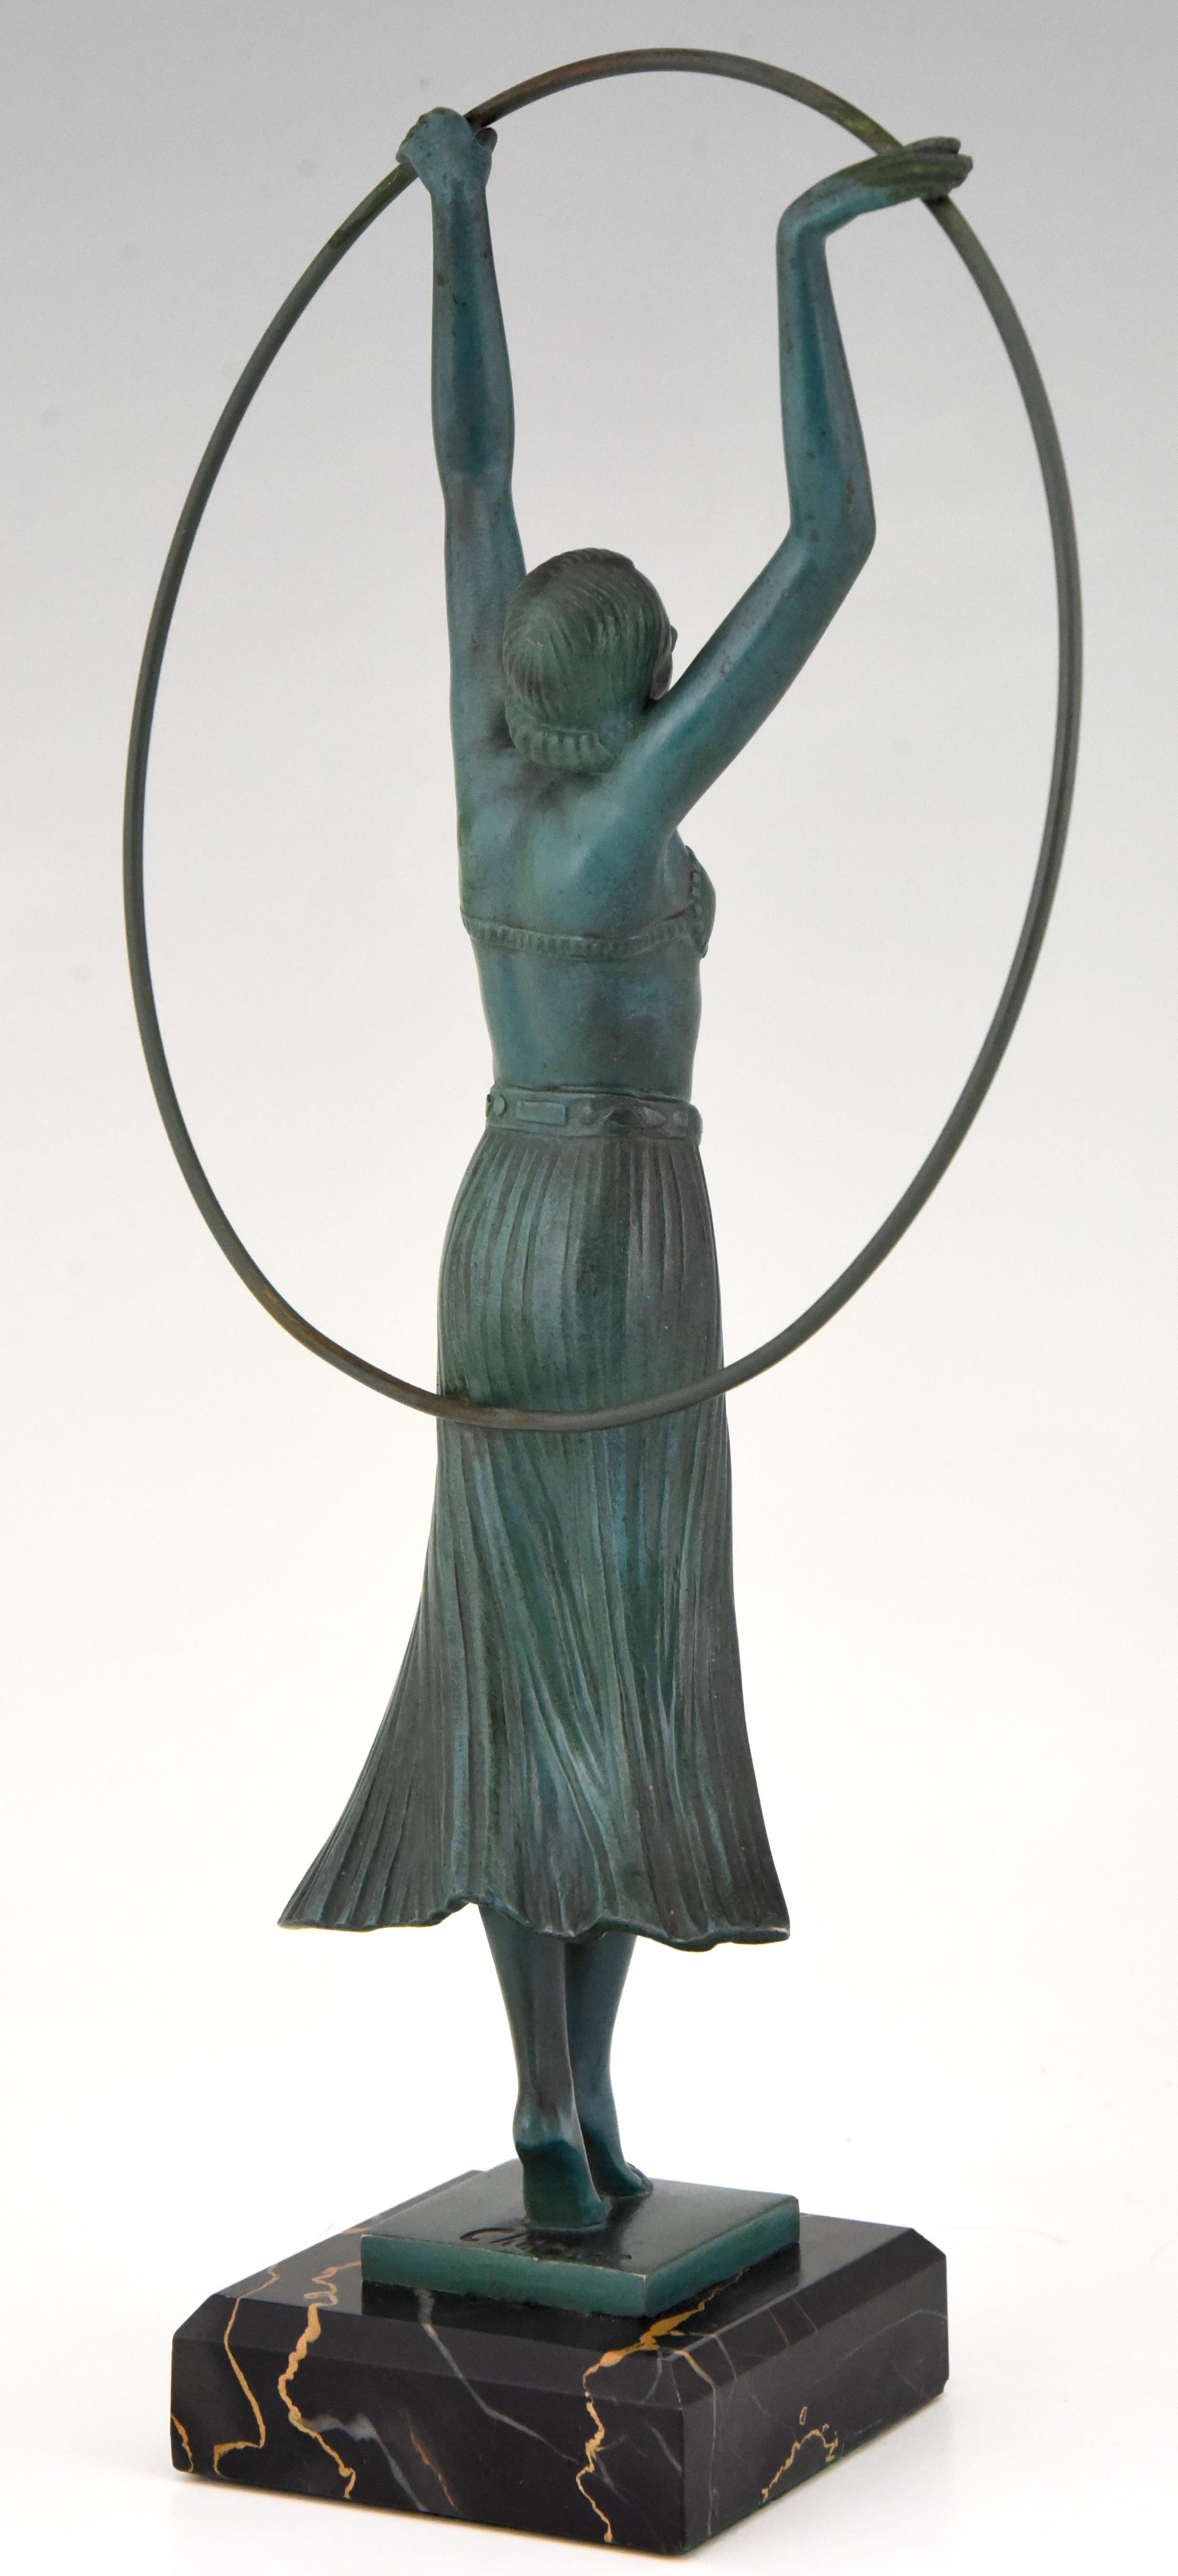 French Art Deco Sculpture Lady Hoop Dancer by Charles for Max Le Verrier, France, 1930